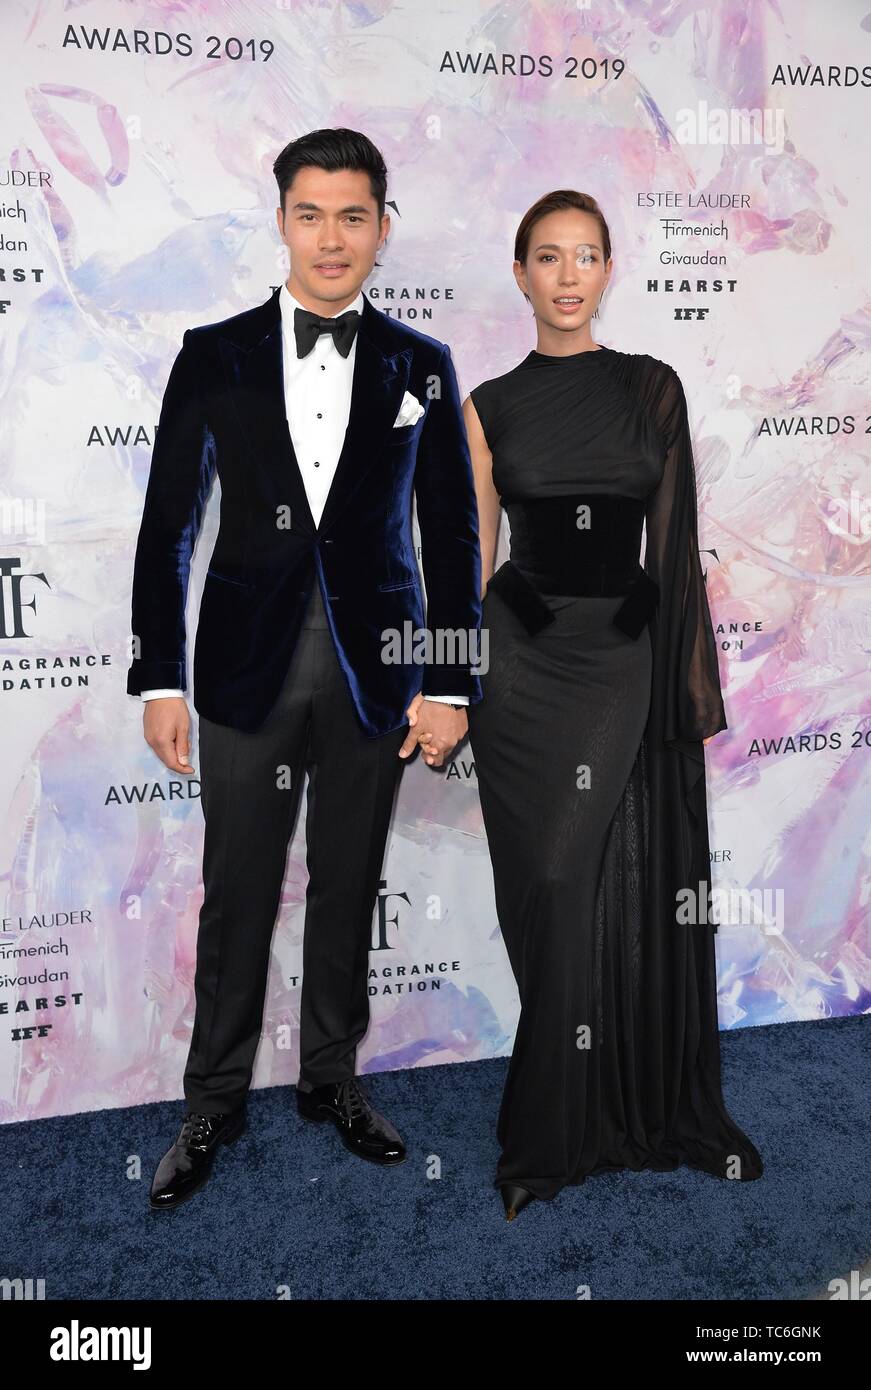 New York, NY, USA. 5th June, 2019. Harry Shum Jr, Shelby Rabara at arrivals for The Fragrance Foundation Awards FiFi's, David H. Koch Theater at Lincoln Center, New York, NY June 5, 2019. Credit: Kristin Callahan/Everett Collection/Alamy Live News Stock Photo